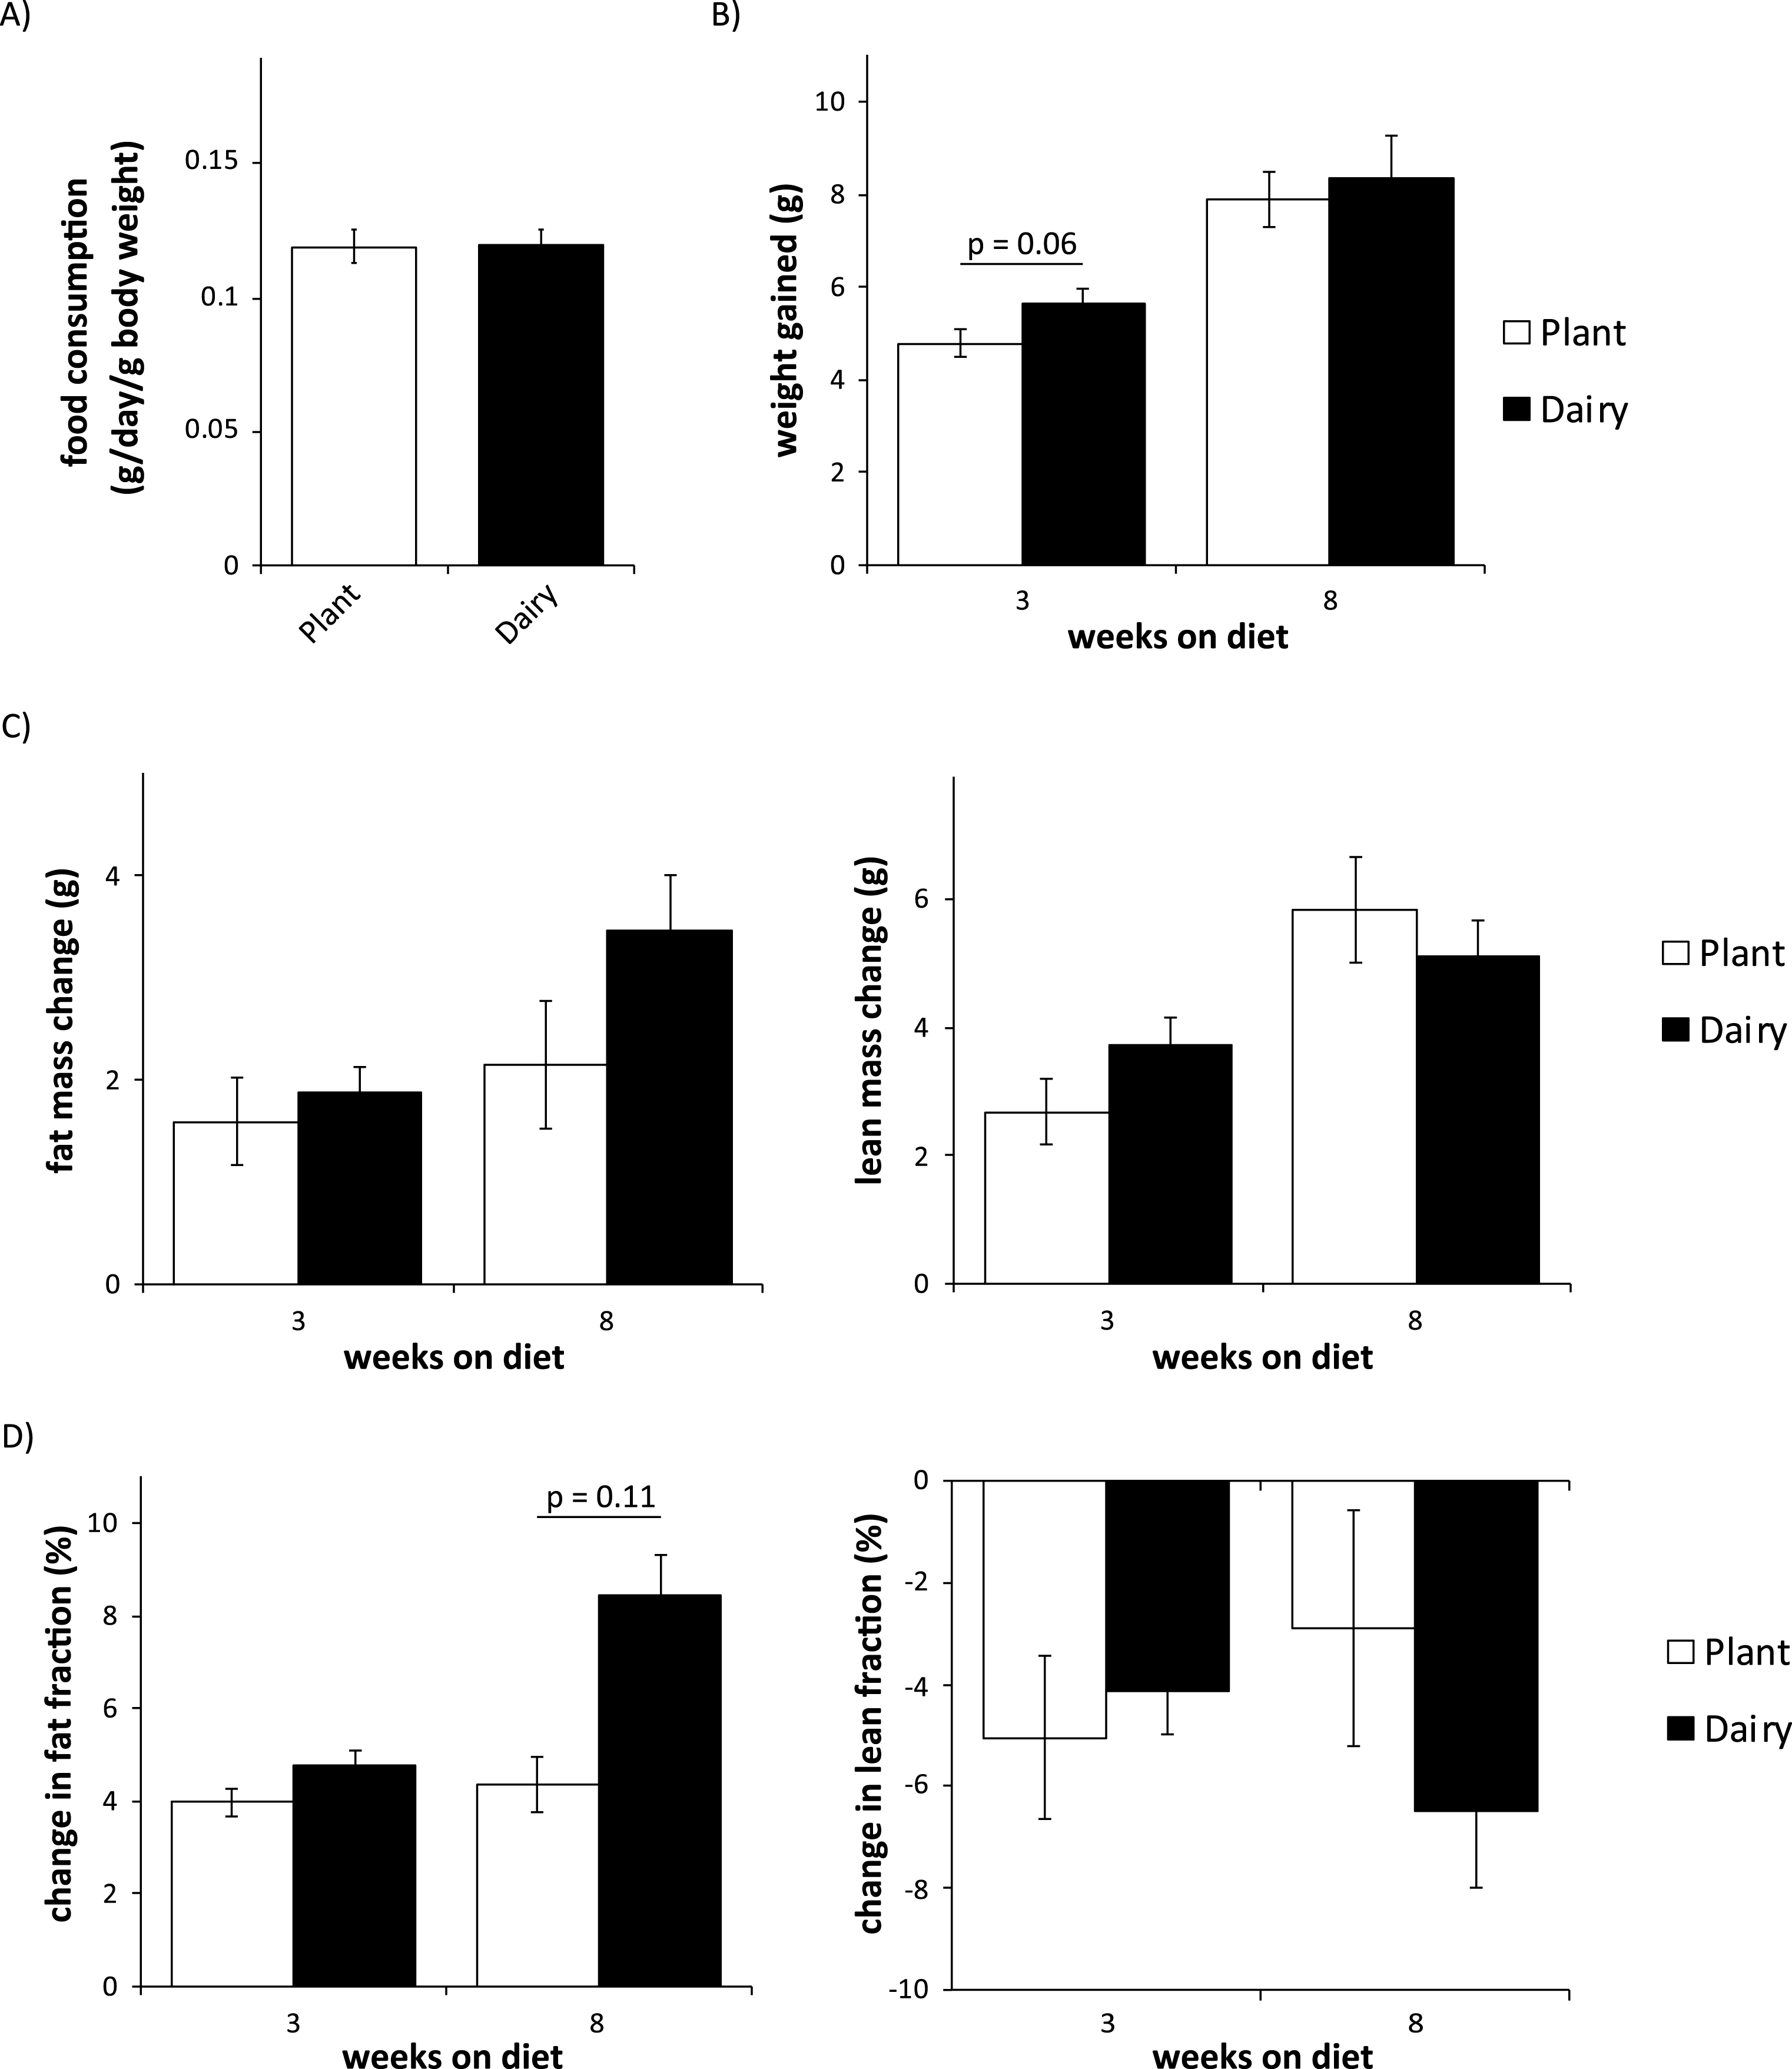 Mice consuming plant or dairy protein diets have similar food consumption, weight gain, and body composition. (A) Food consumption was measured after 2 weeks on either diet. (B) Weight was determined immediately prior to diet start and after 3 and 8 weeks. (C-D) Fat and lean mass (C) and fat and lean fraction (D) were determined immediately prior to diet start and after 3 and 8 weeks. (n = 9/group; two-tailed t-test, * = p < 0.05). Error bars represent SE.